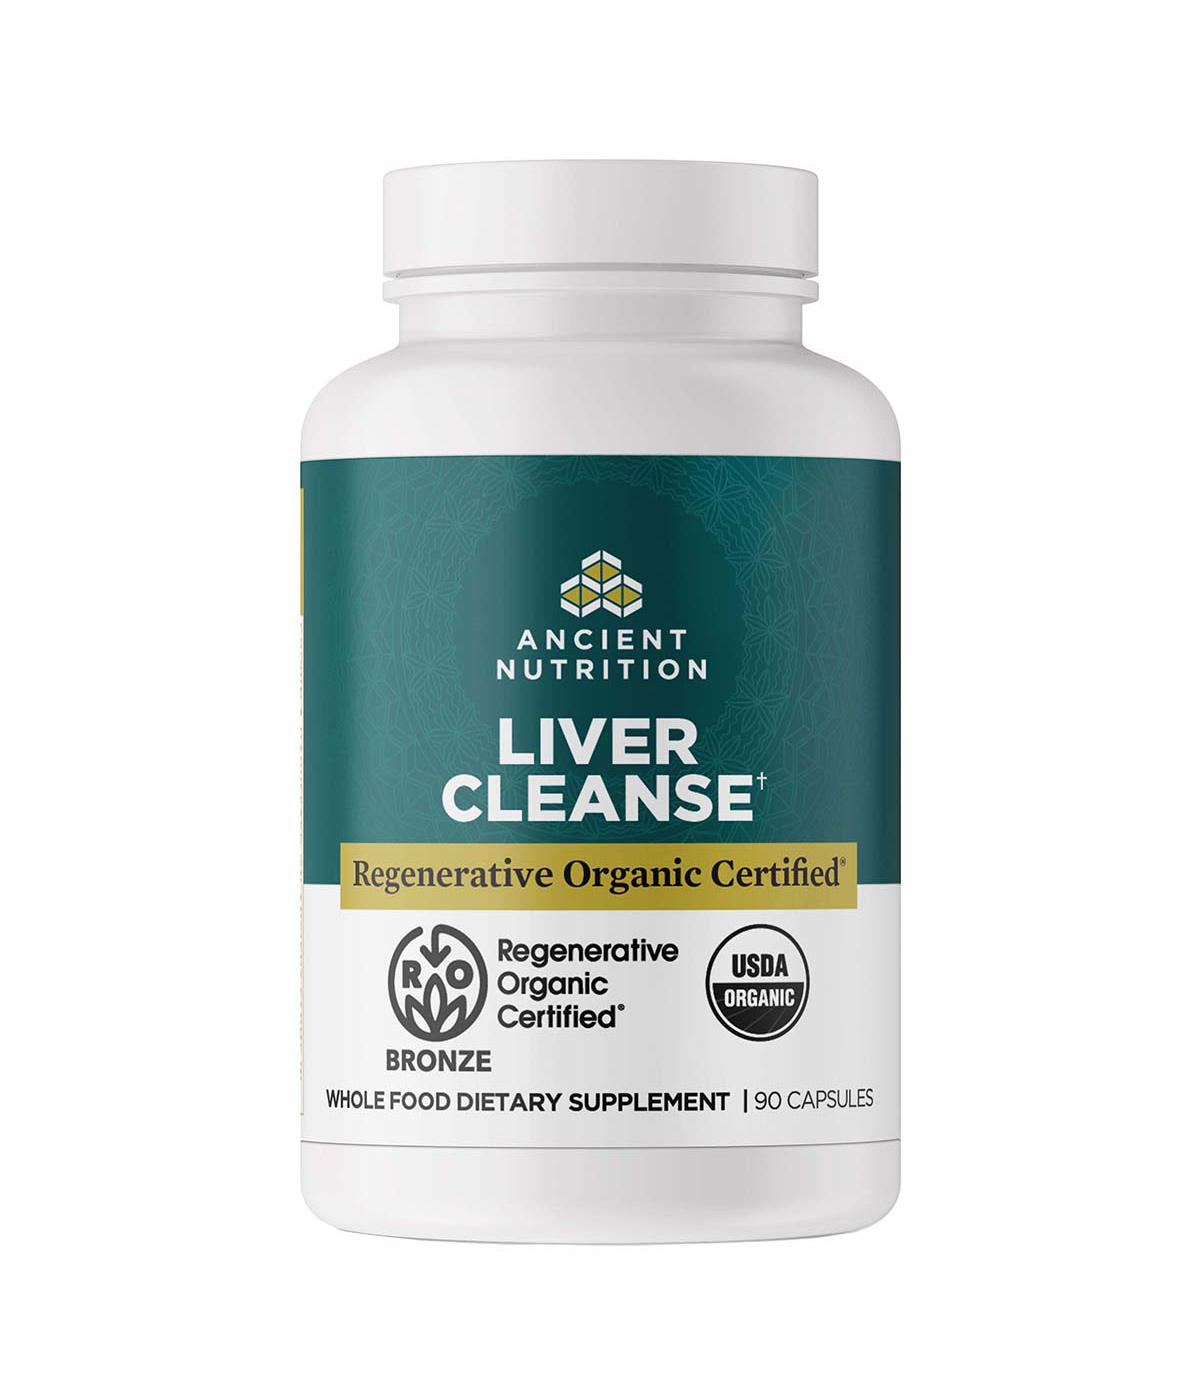 Ancient Nutrition Liver Cleanse Capsules; image 2 of 5